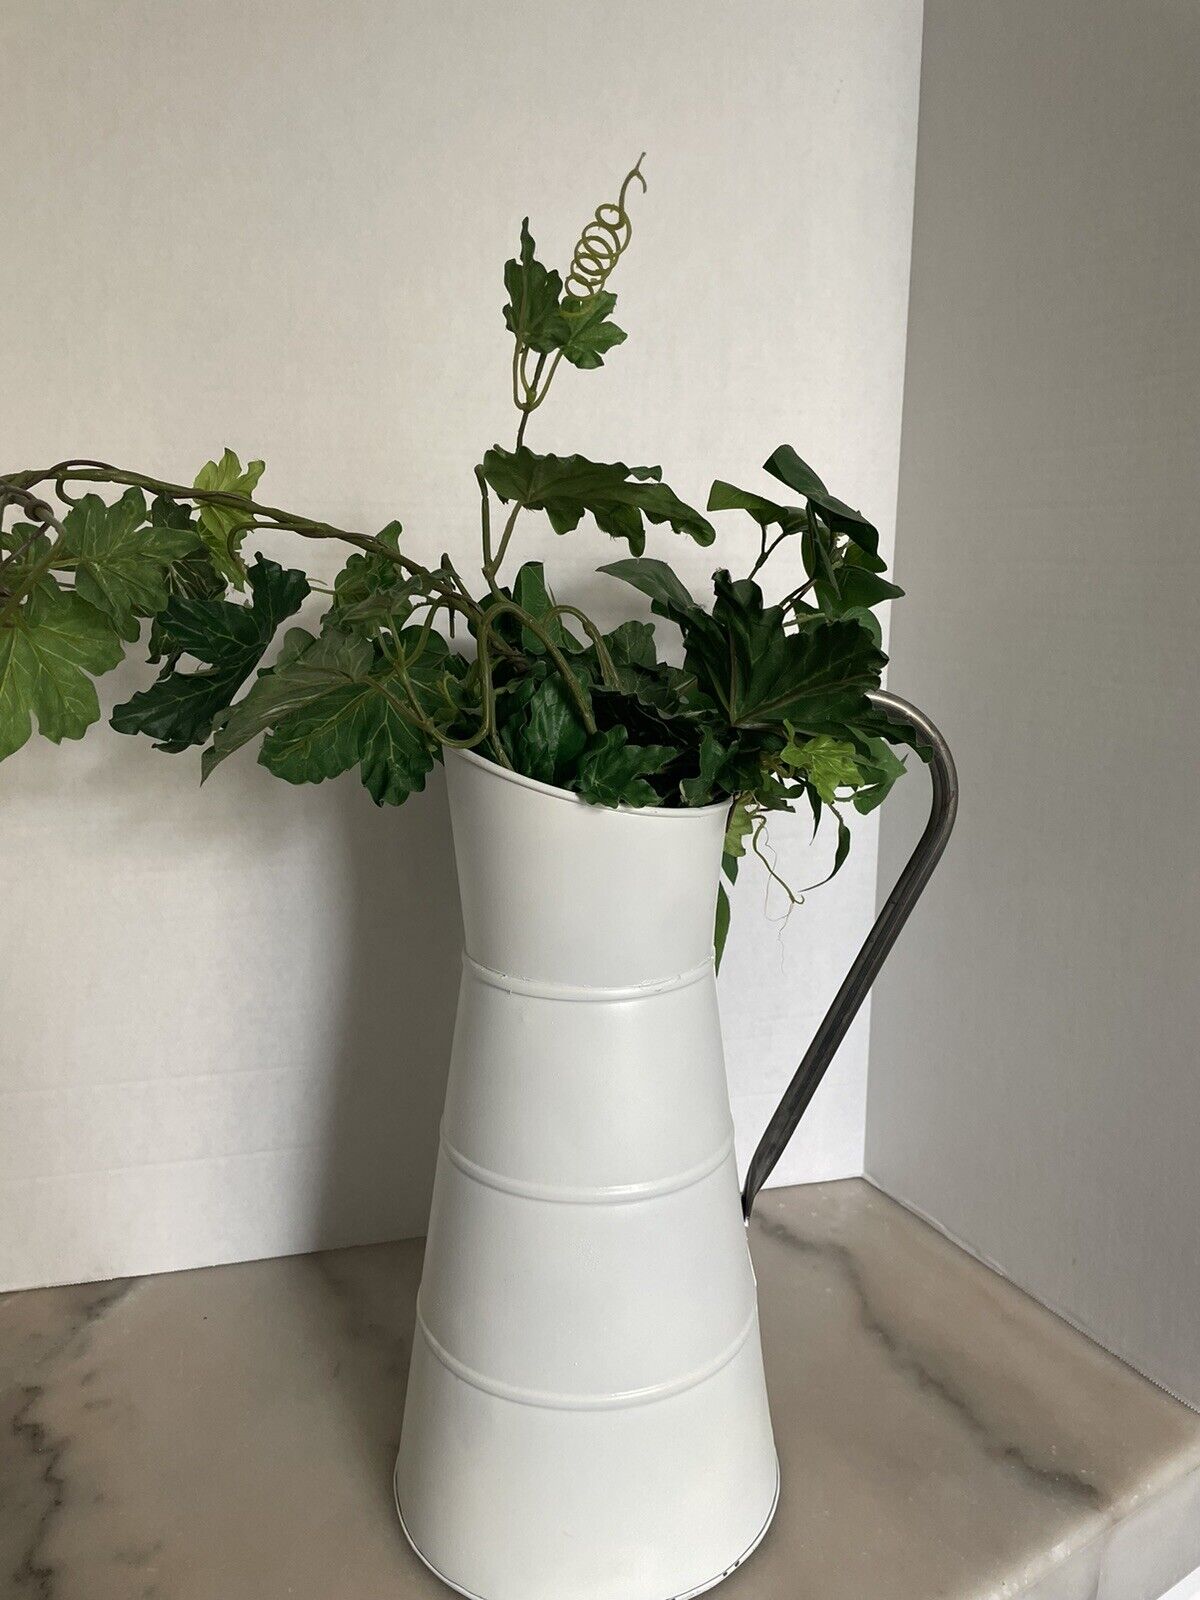 14.5” Parisian Pitcher with Greenery